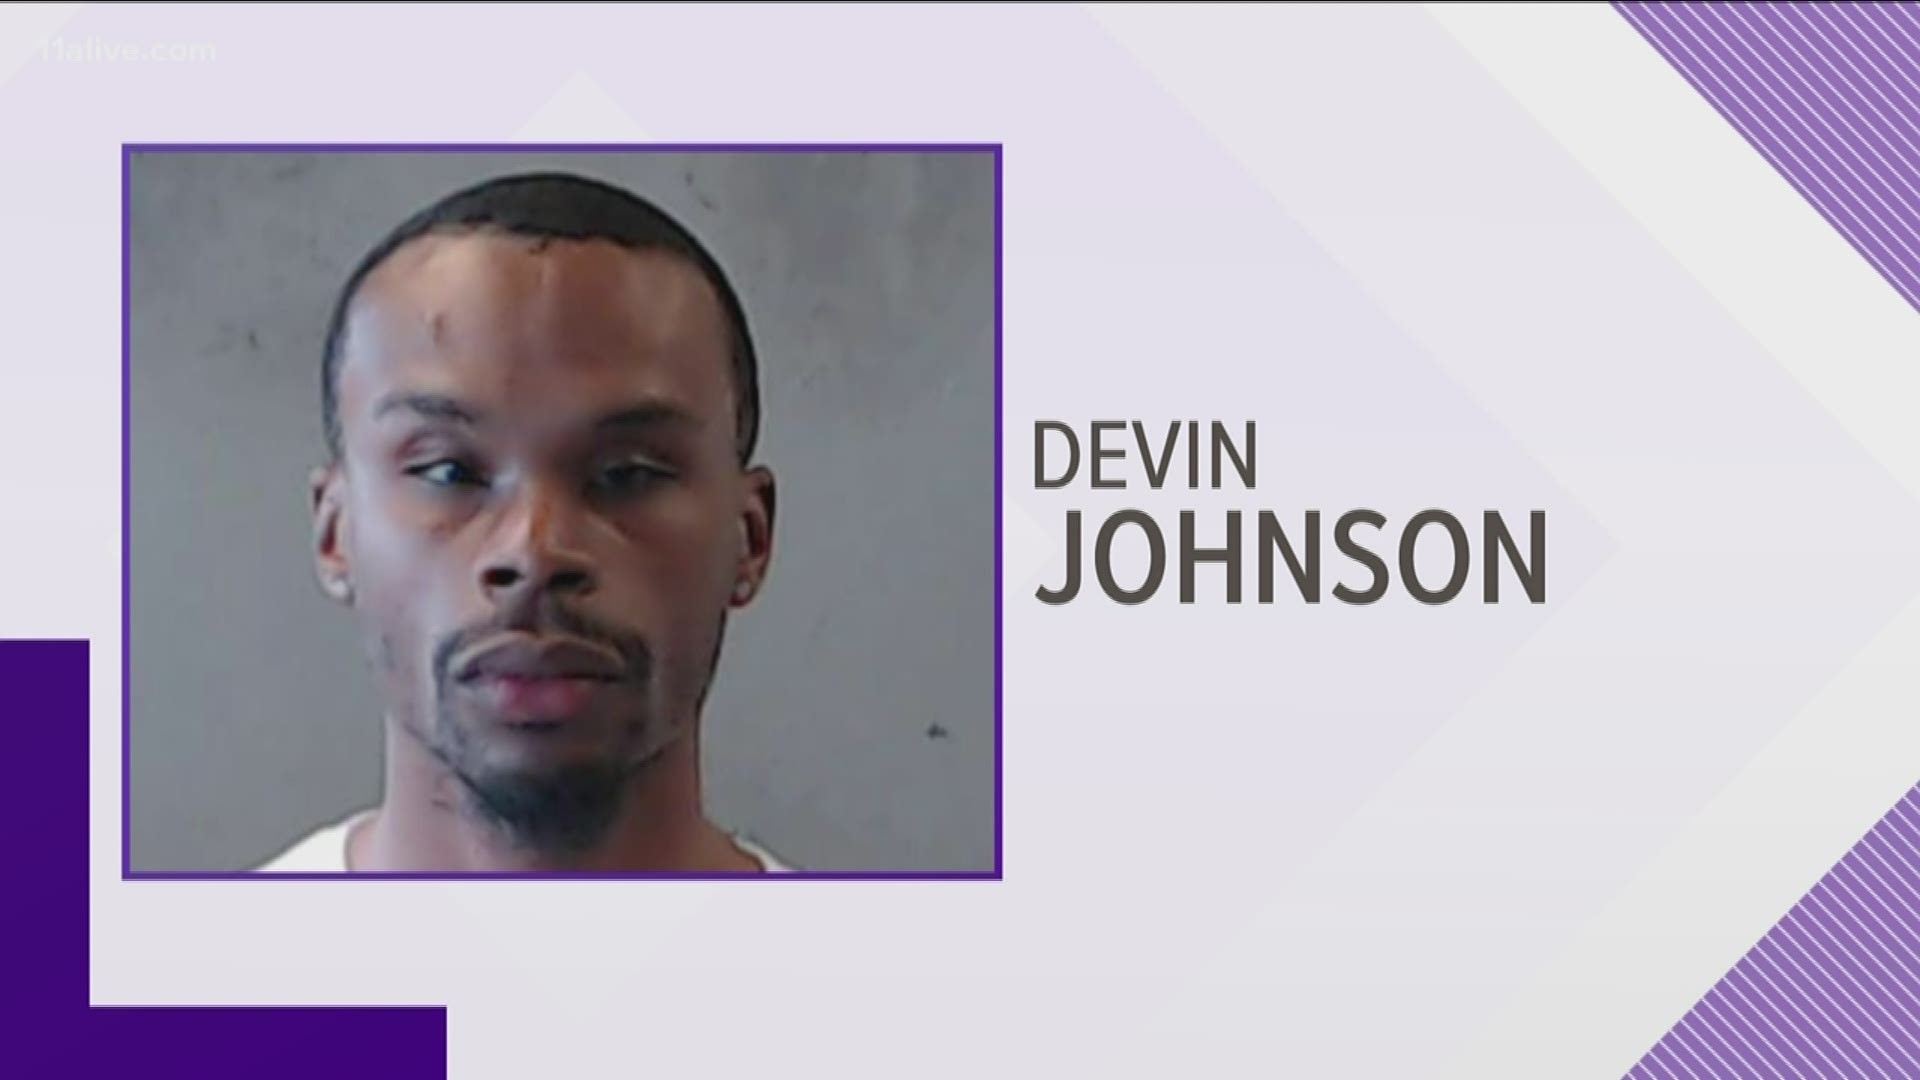 On Tuesday, Dunwoody Police announced the arrest of 28-year-old Devin Lecorry Johnson of Mableton on charges of child molestation, enticing a child and obstruction of officers following an investigation that began on Aug. 4.